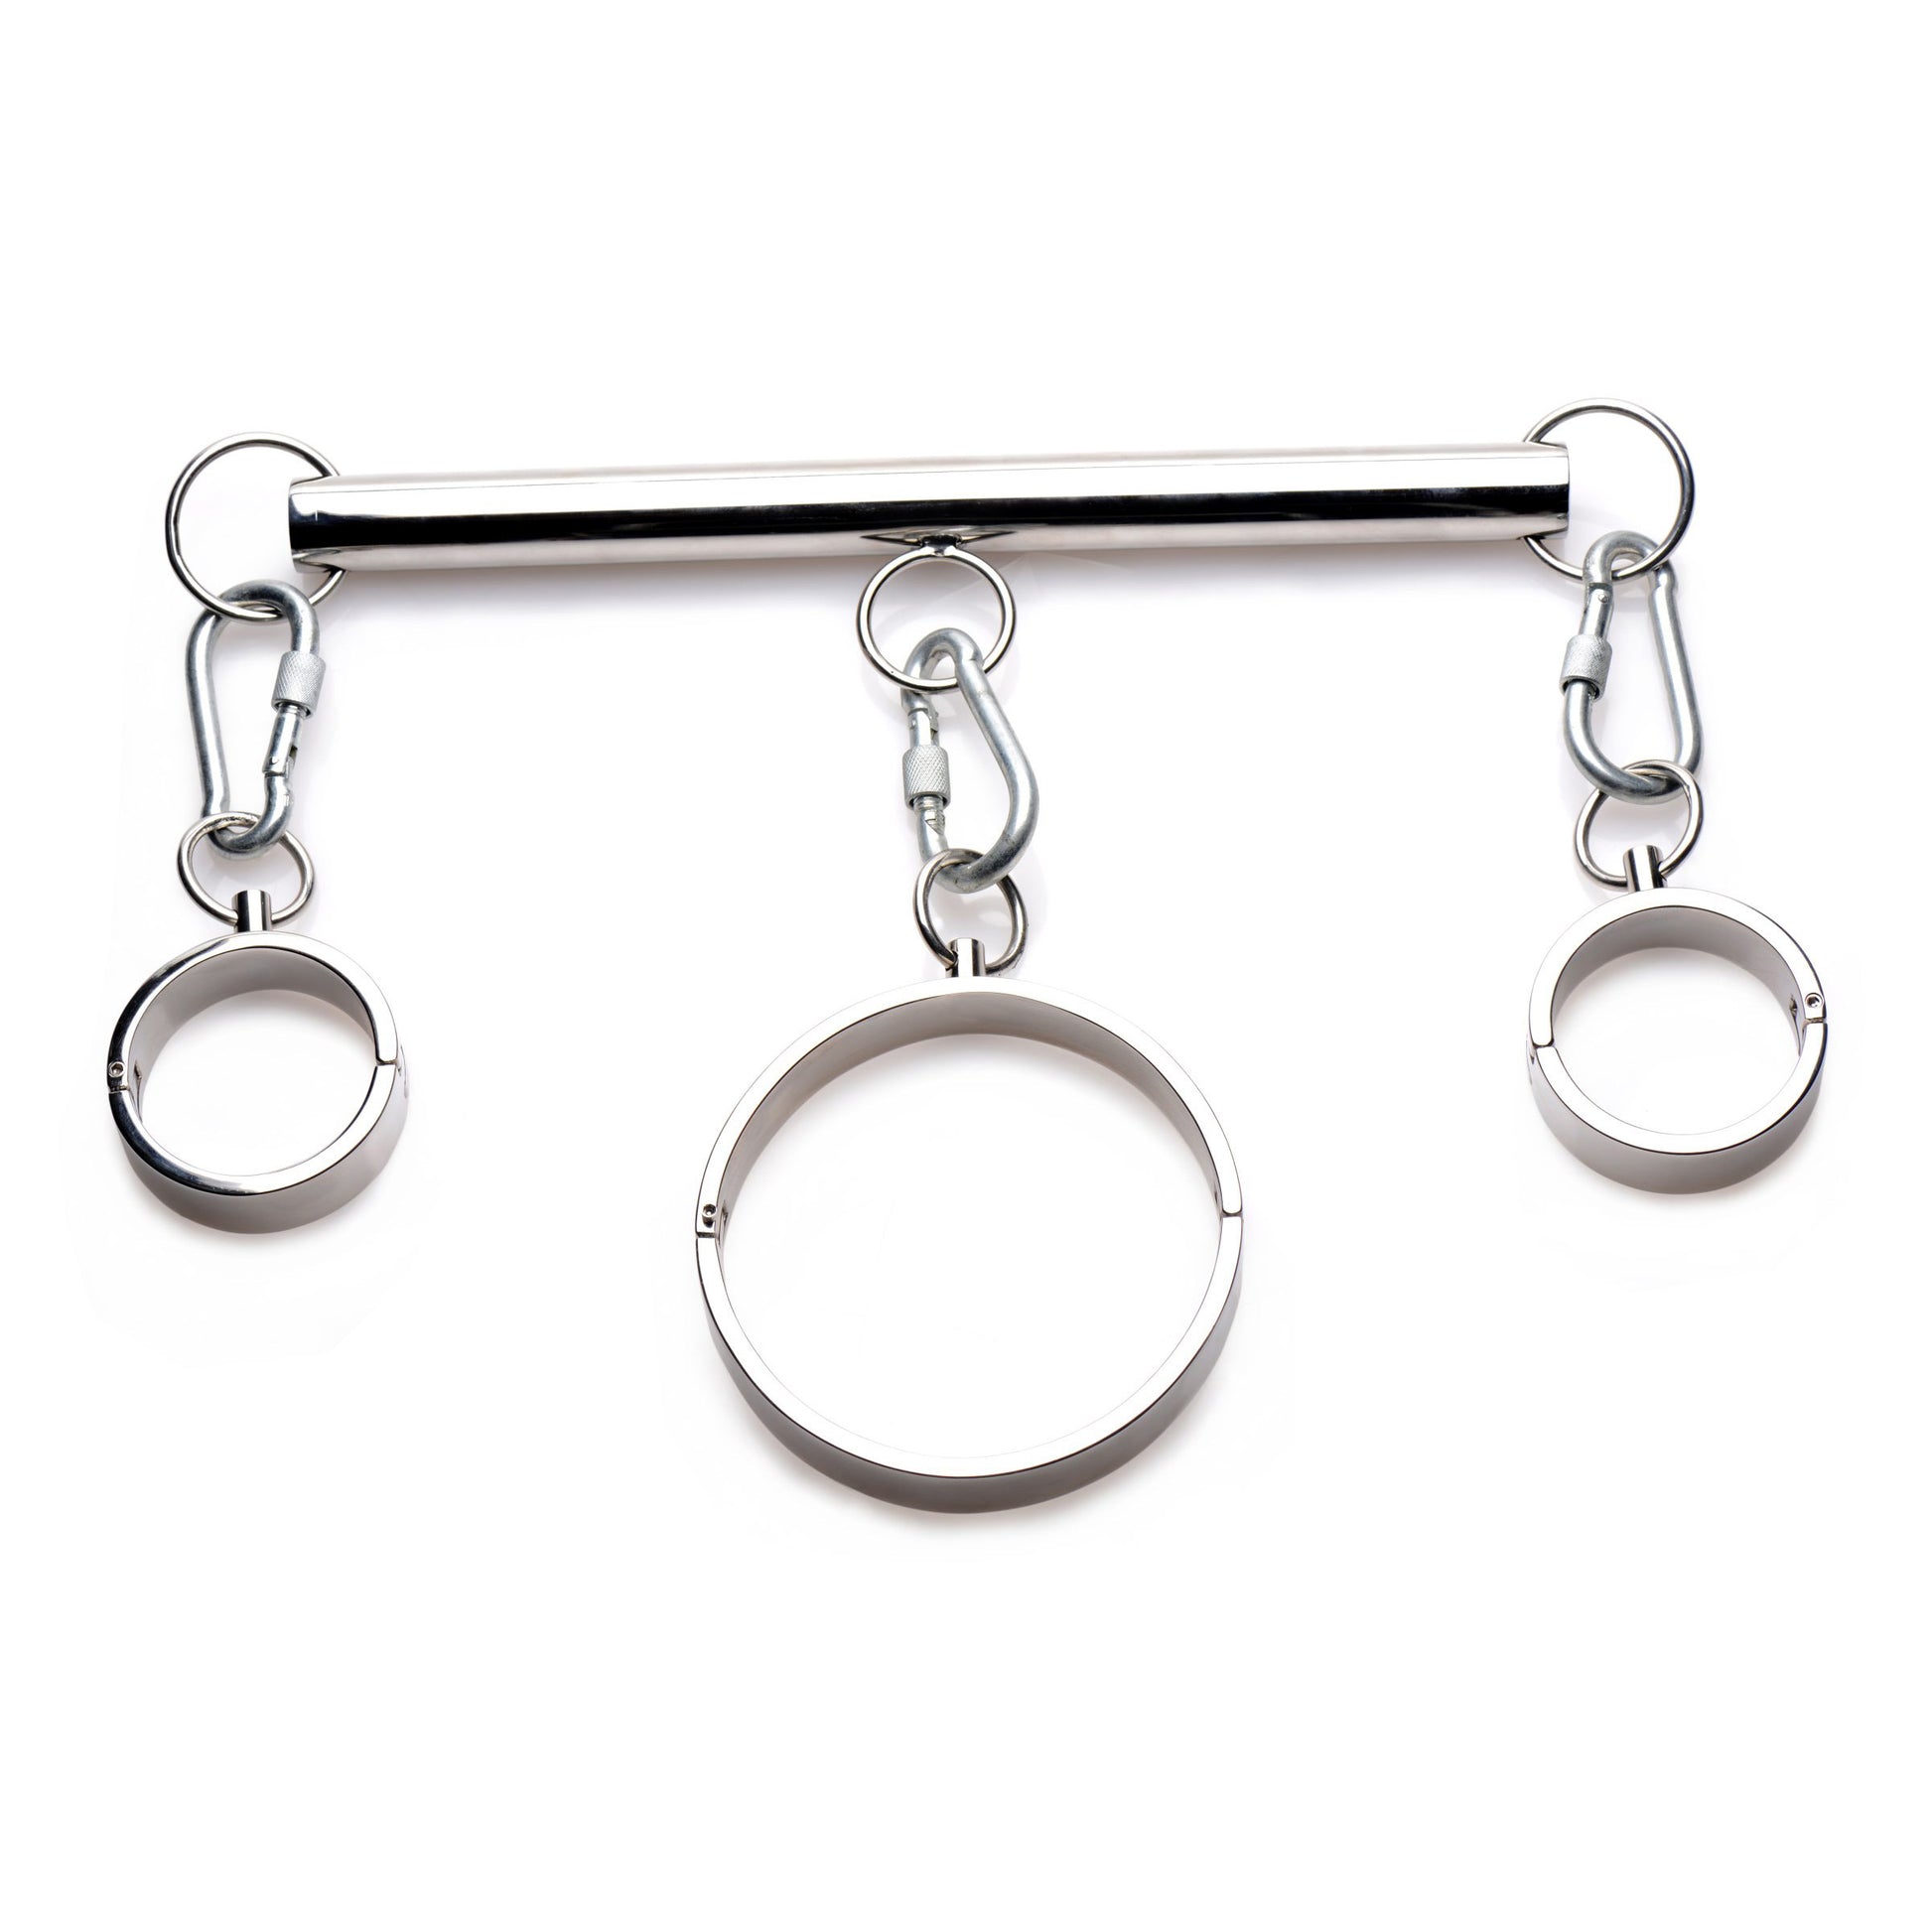 Stainless Steel Yoke with Collar and Cuffs - UABDSM